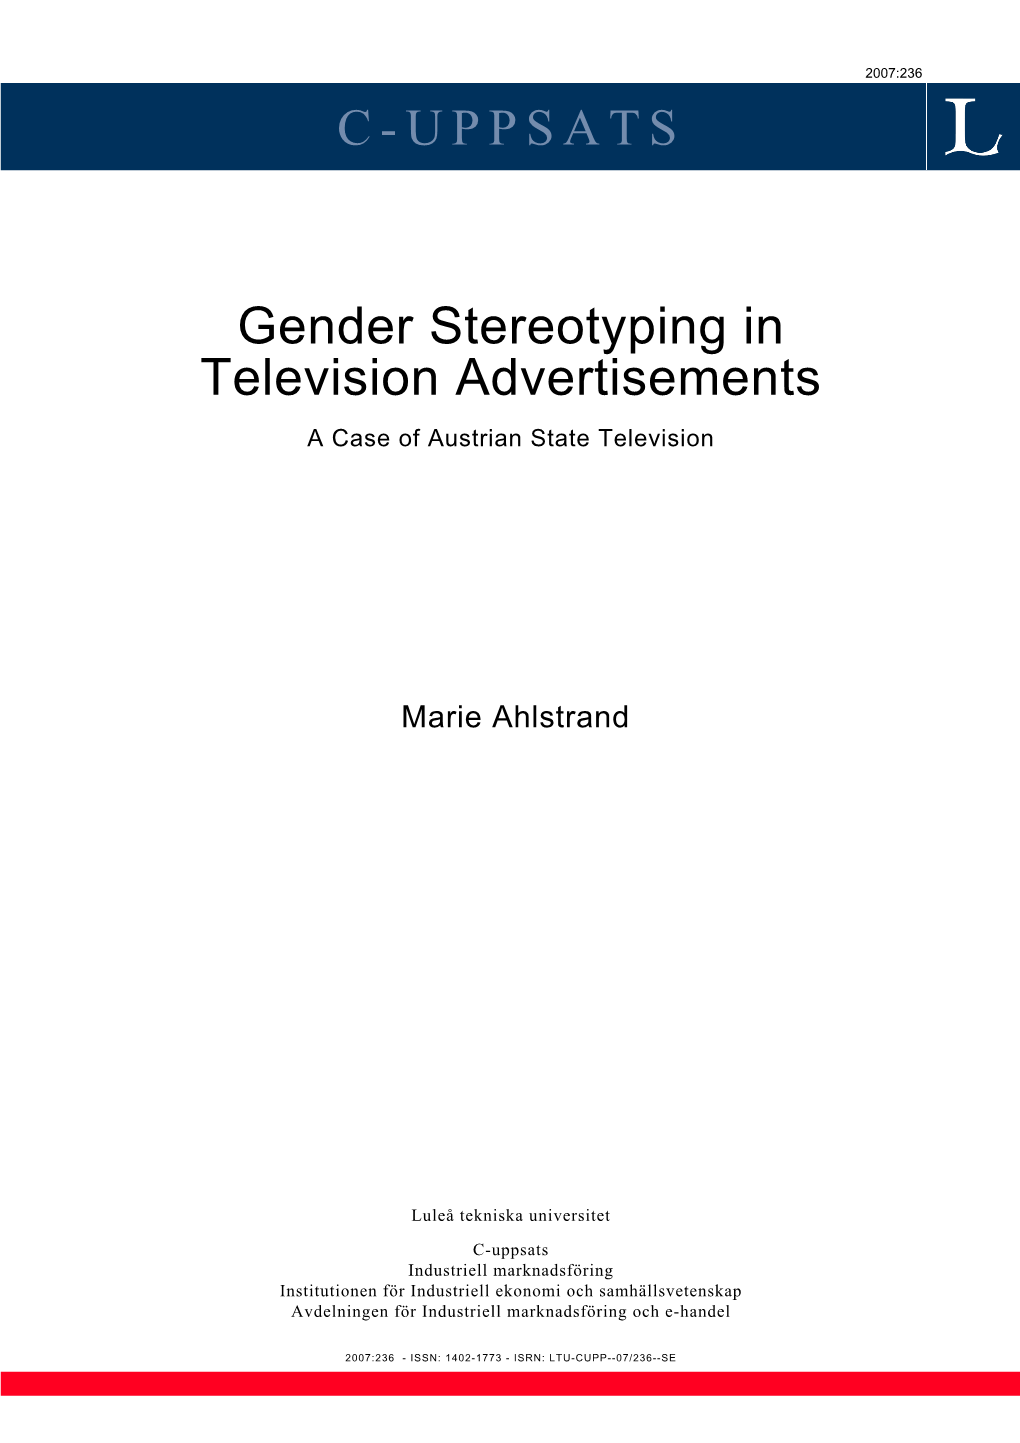 C-UPPSATS Gender Stereotyping in Television Advertisements